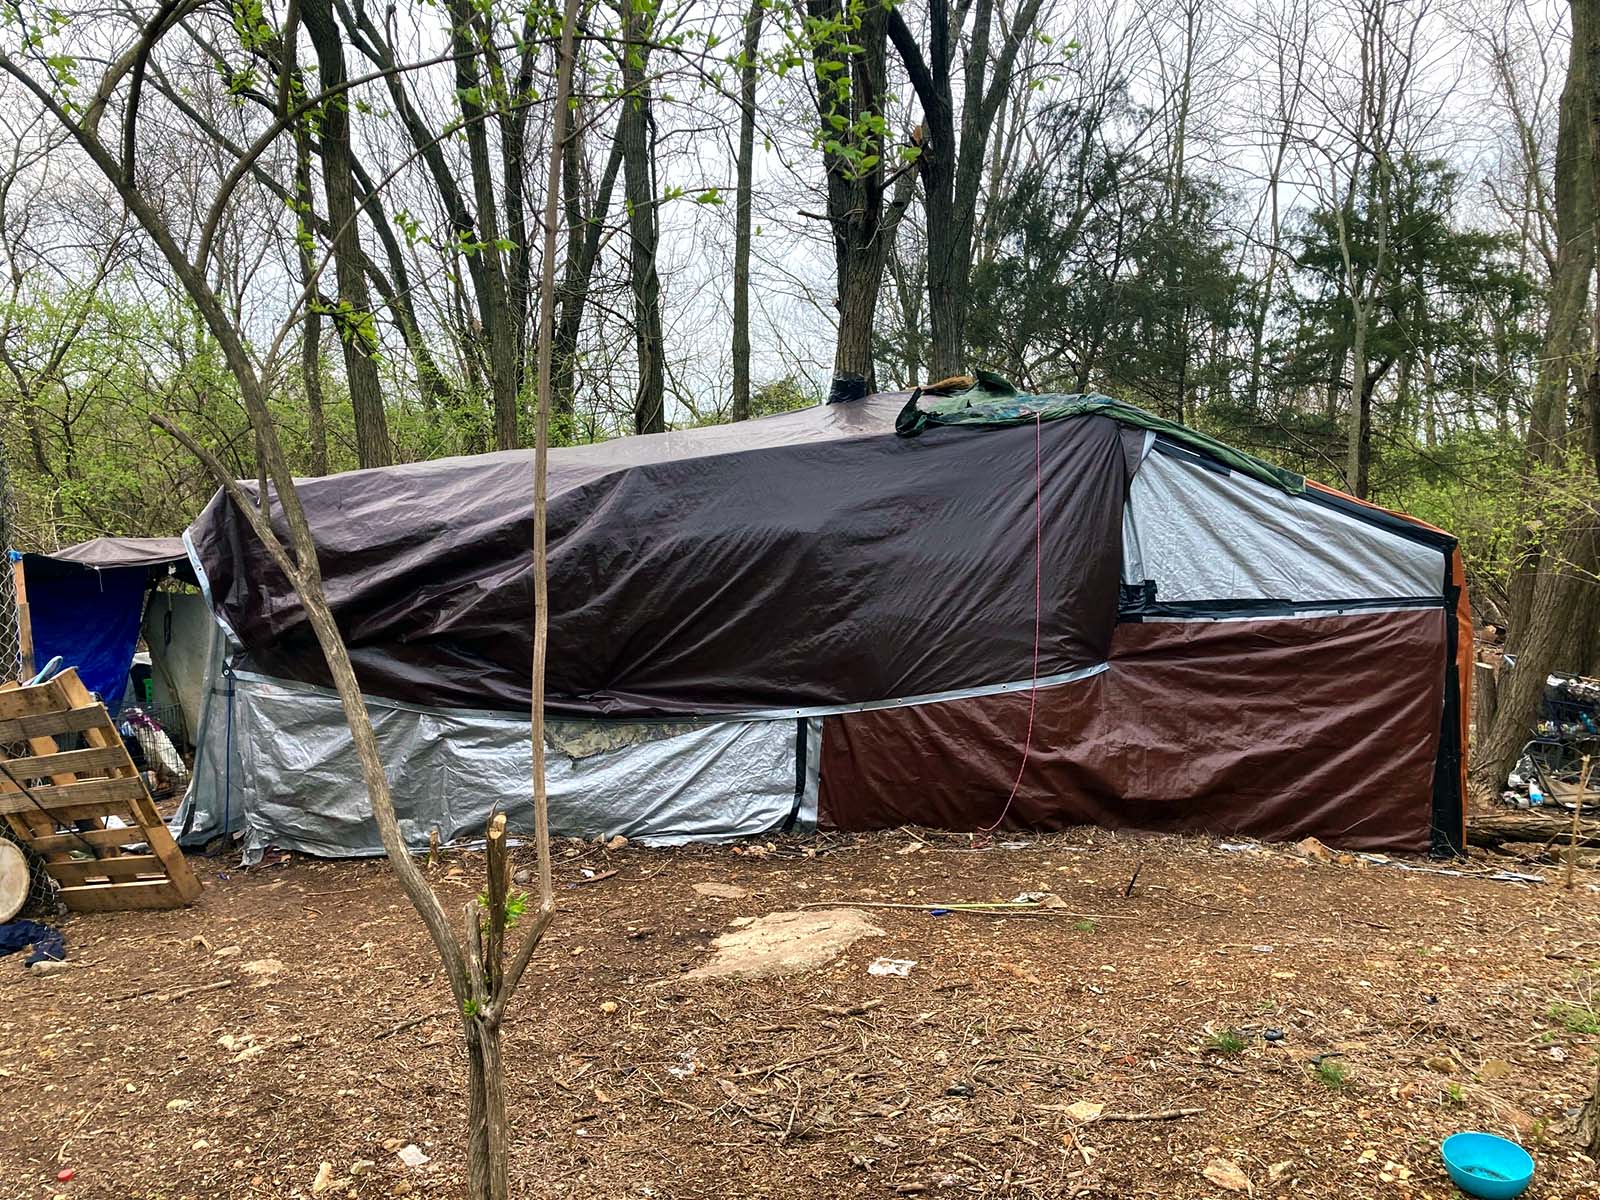 This is a tent structure a homeless person built. It is at least 20 feet long.